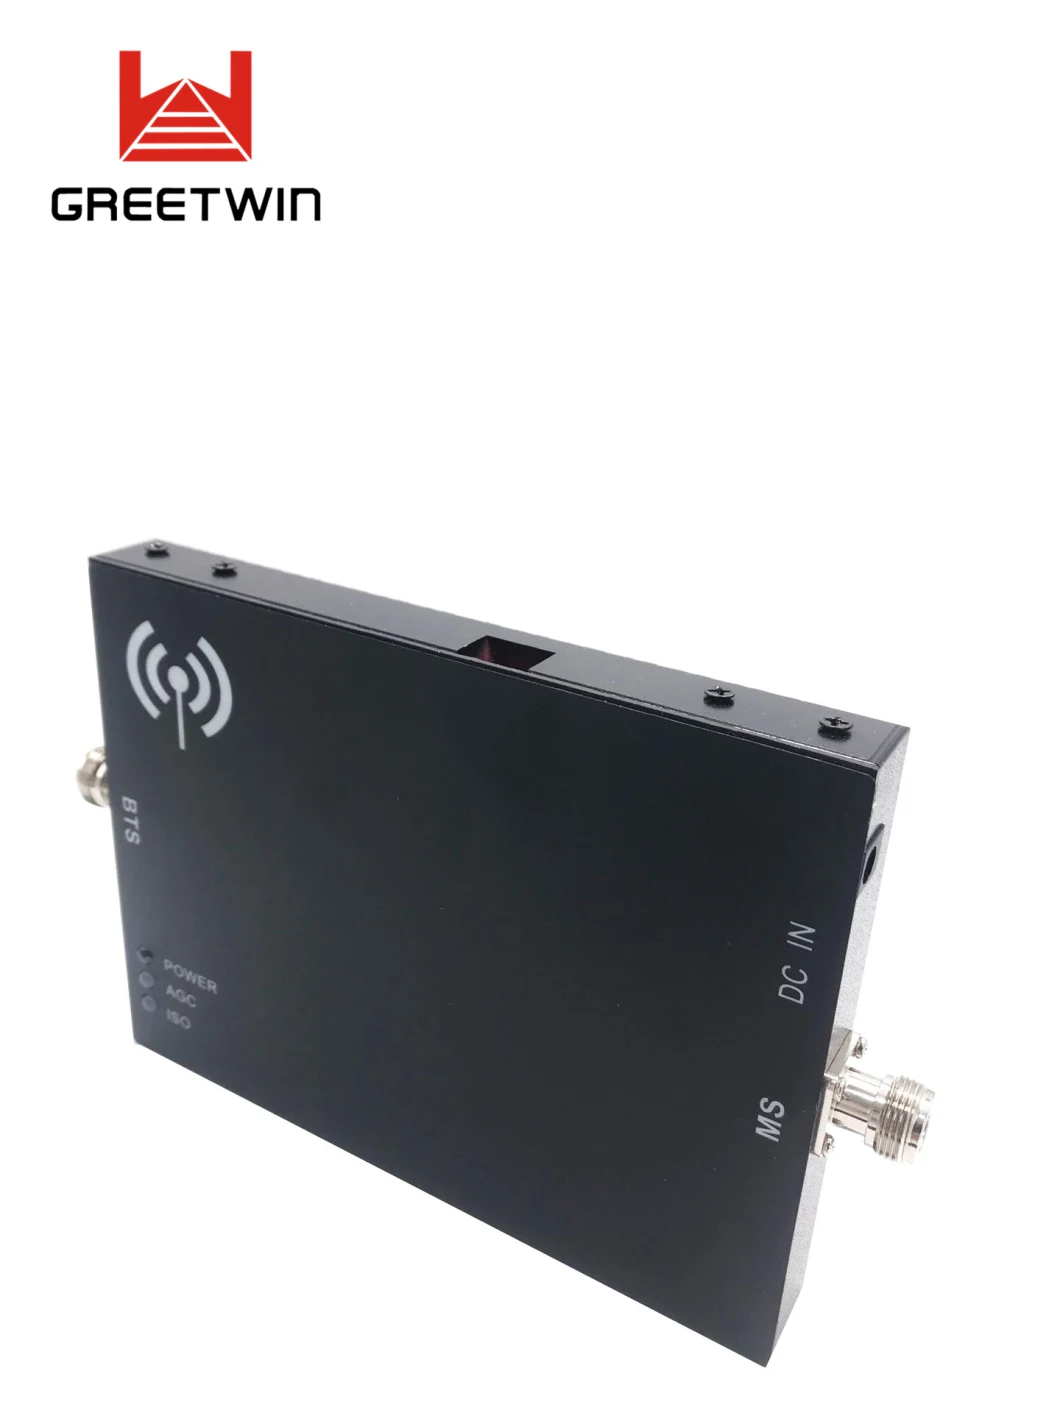 23dBm 3G WCDMA 2100MHz Mobile Signal Booster Repeater